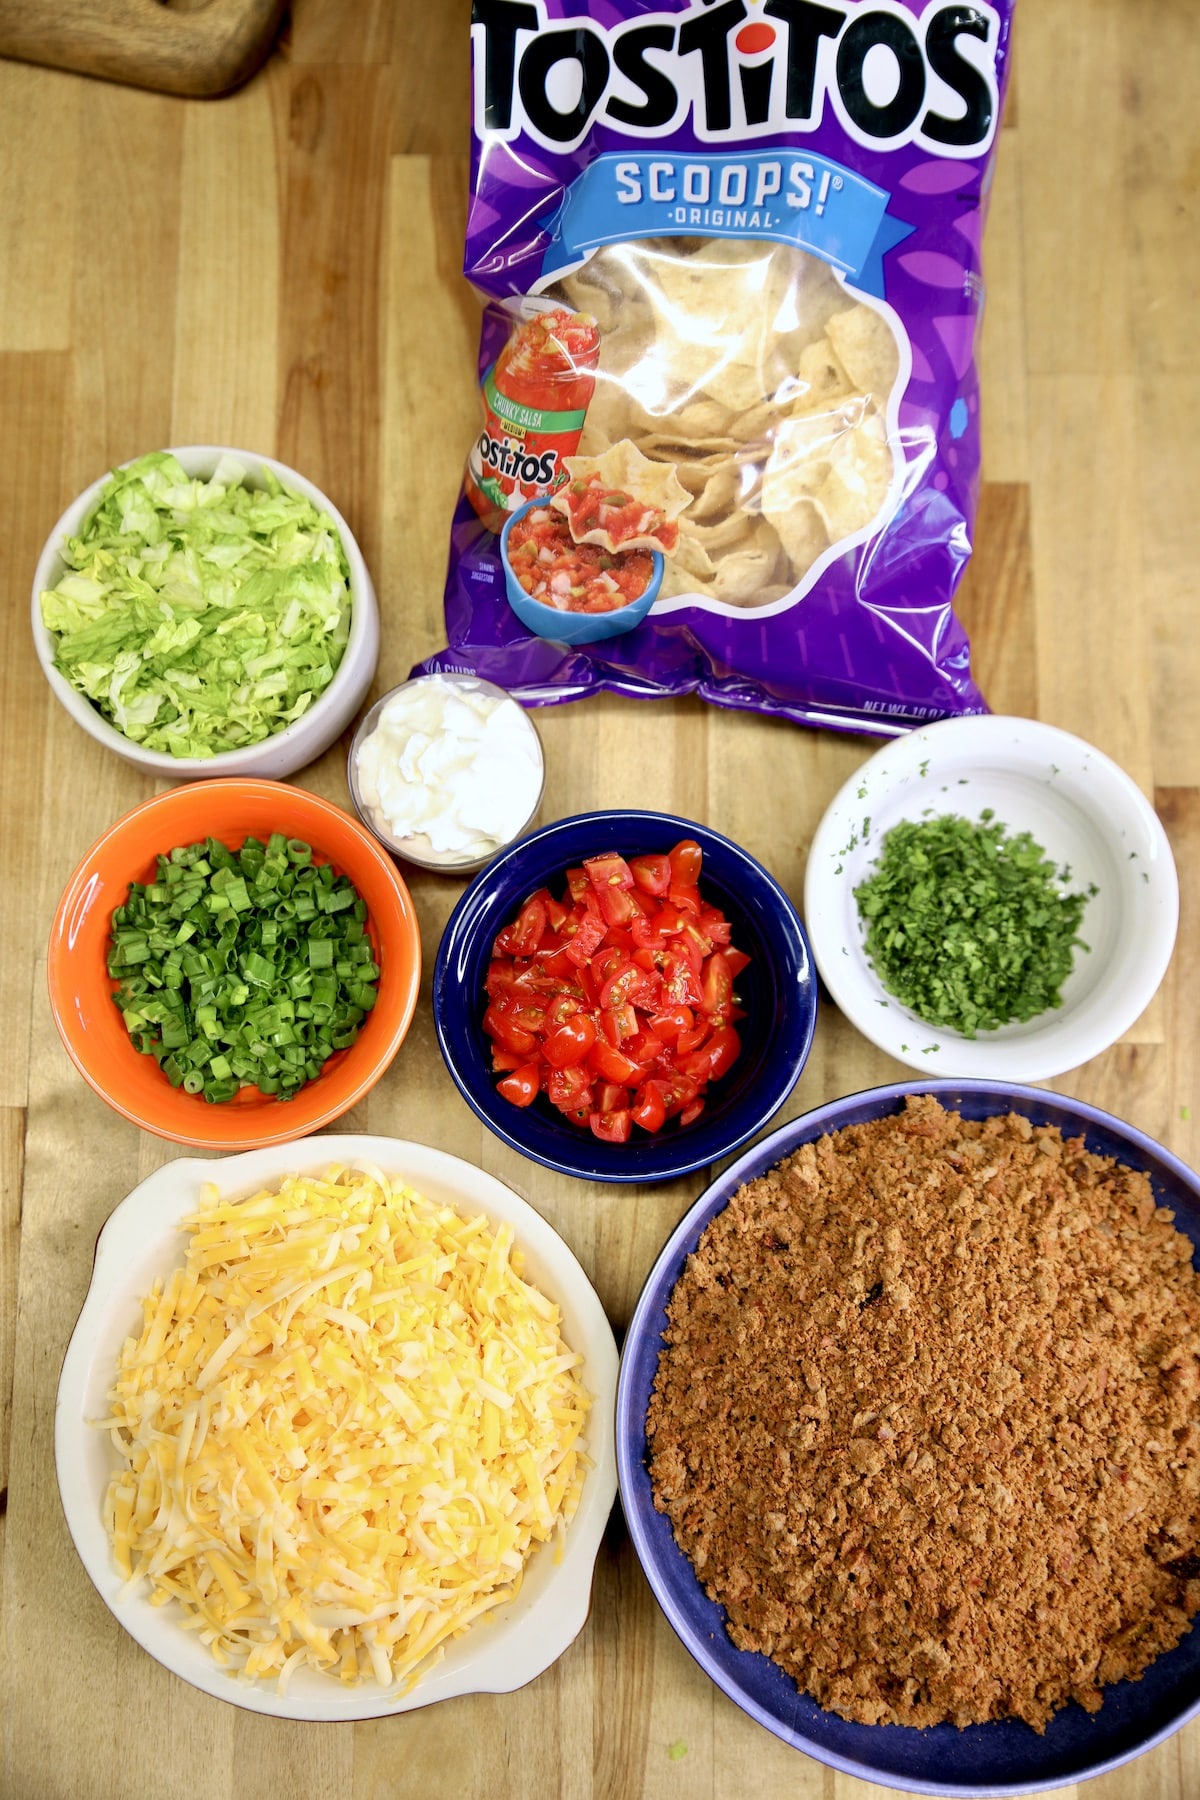 Ingredients for taco bites: taco meat, cheese, green onions, tomatoes, cilantro, lettuce, sour cream.